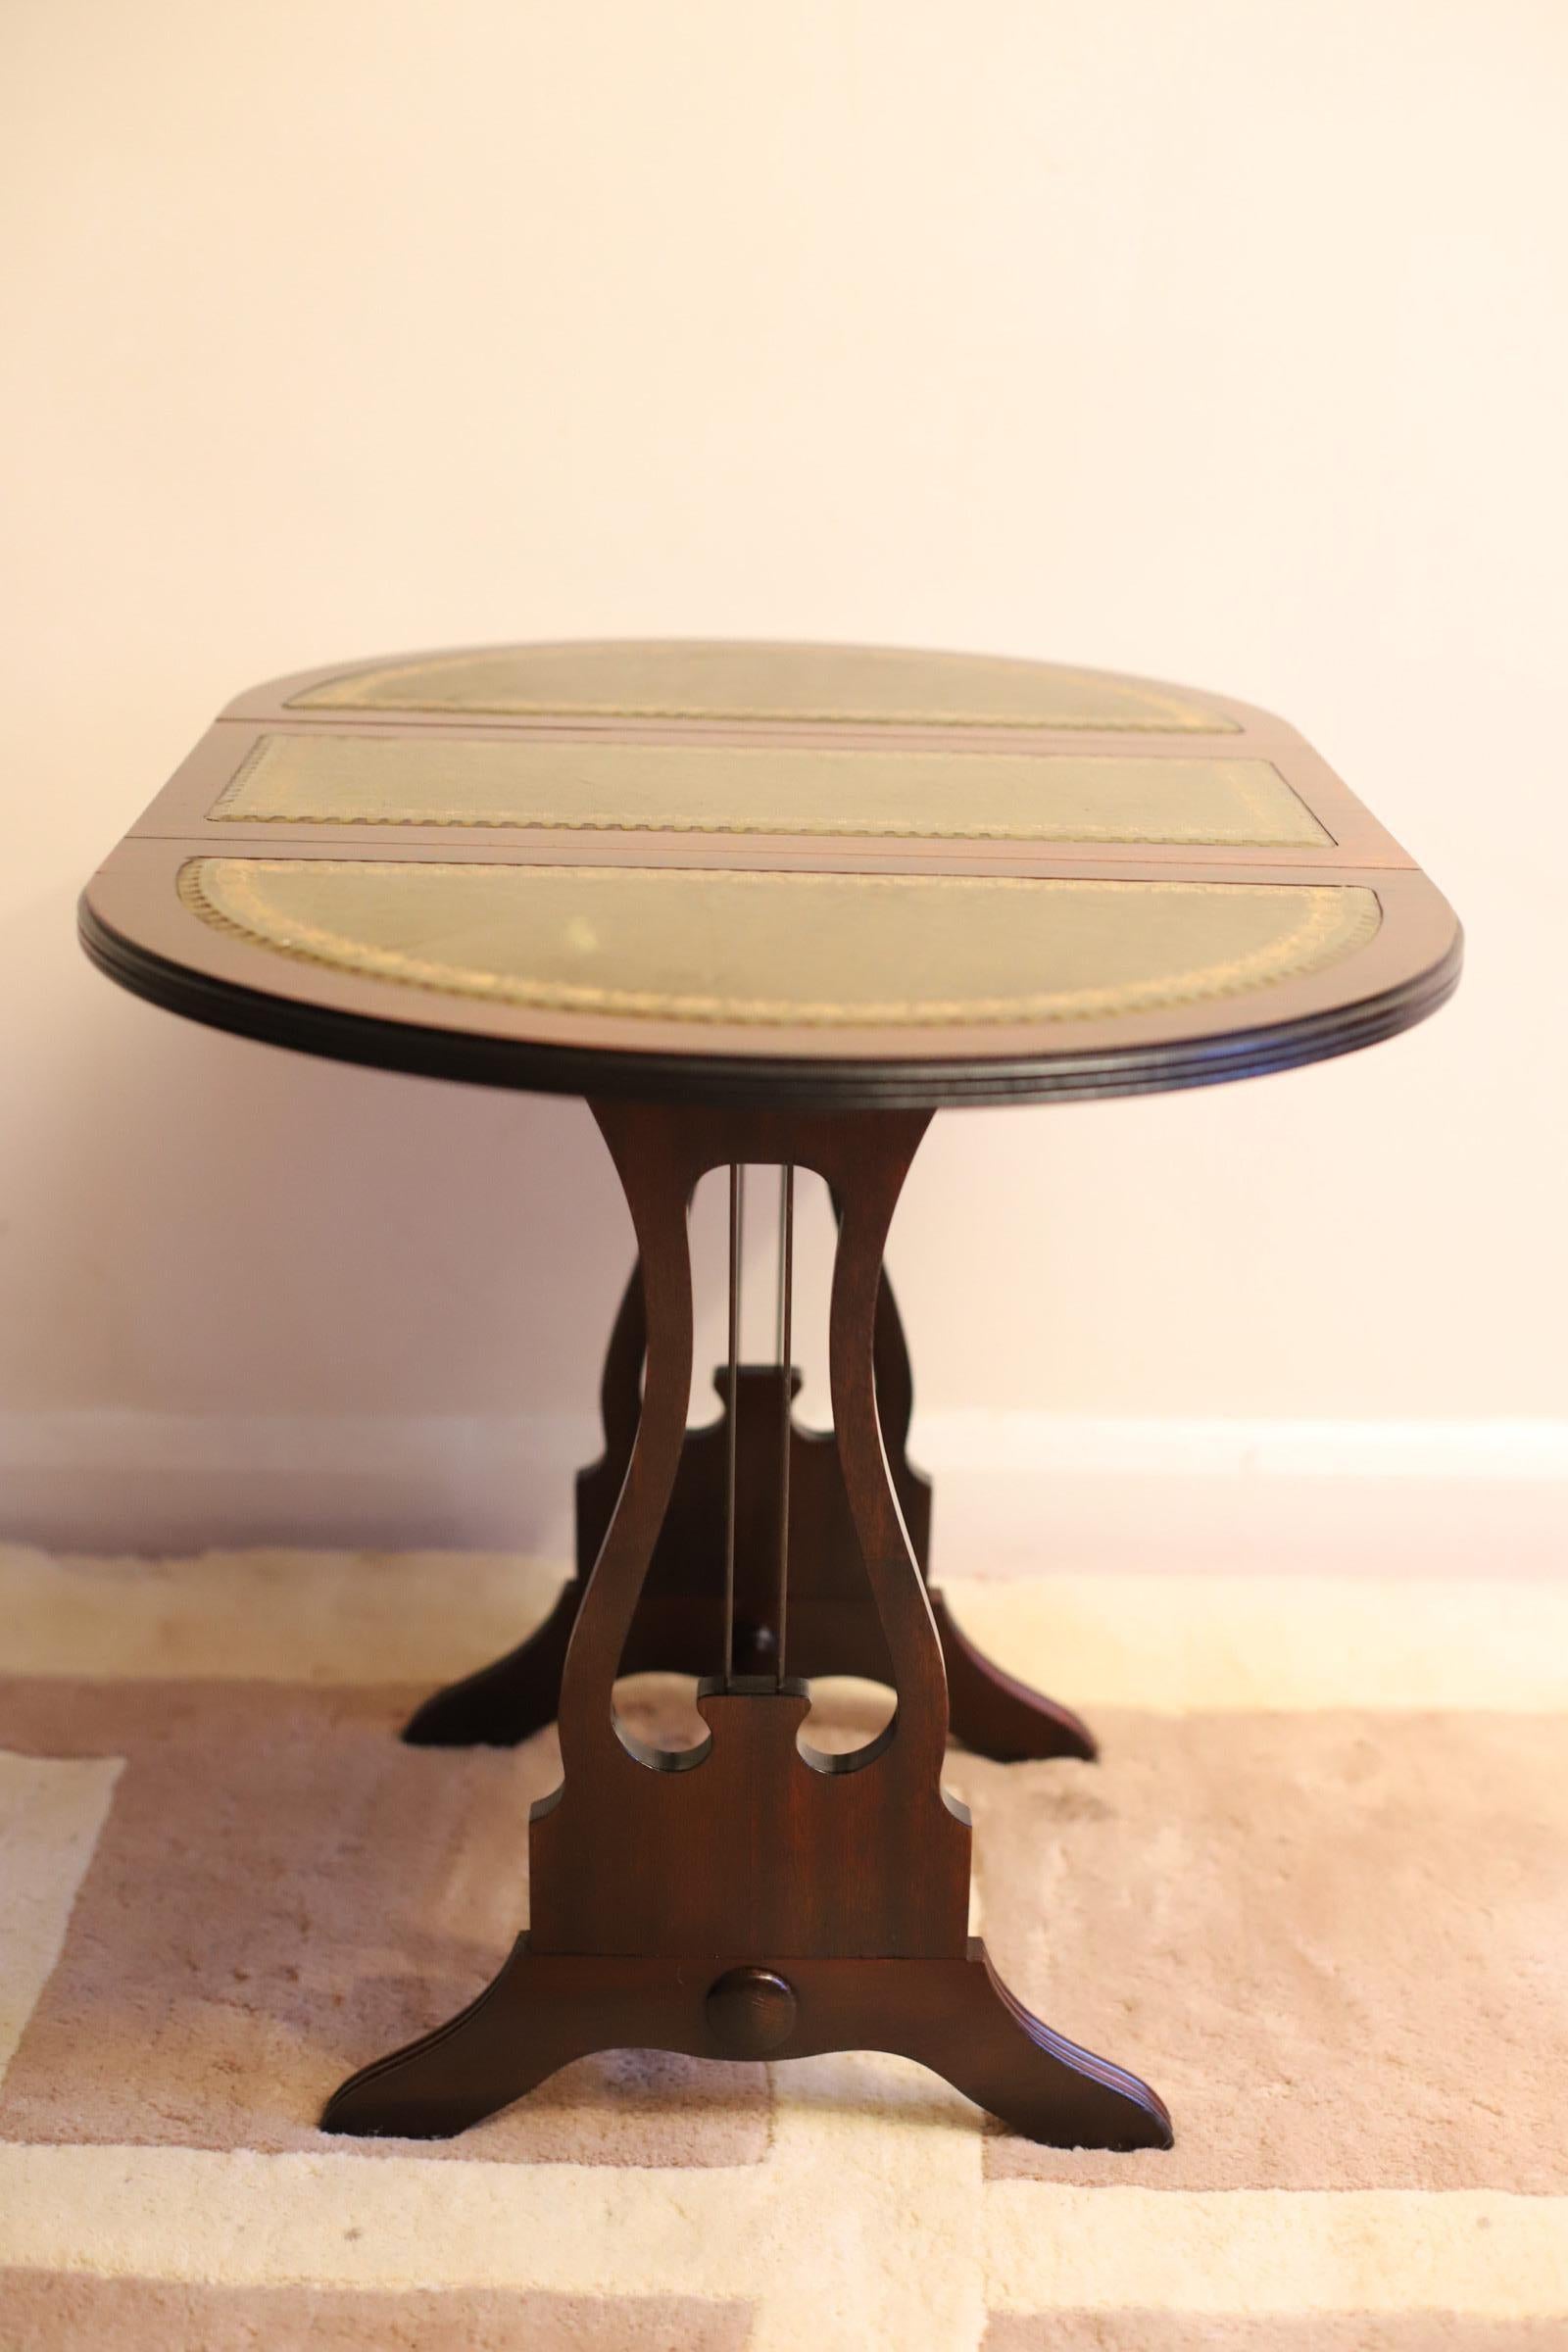 Beautiful Oval Folding Caffe Table With Leather Top In Good Condition For Sale In Crawley, GB